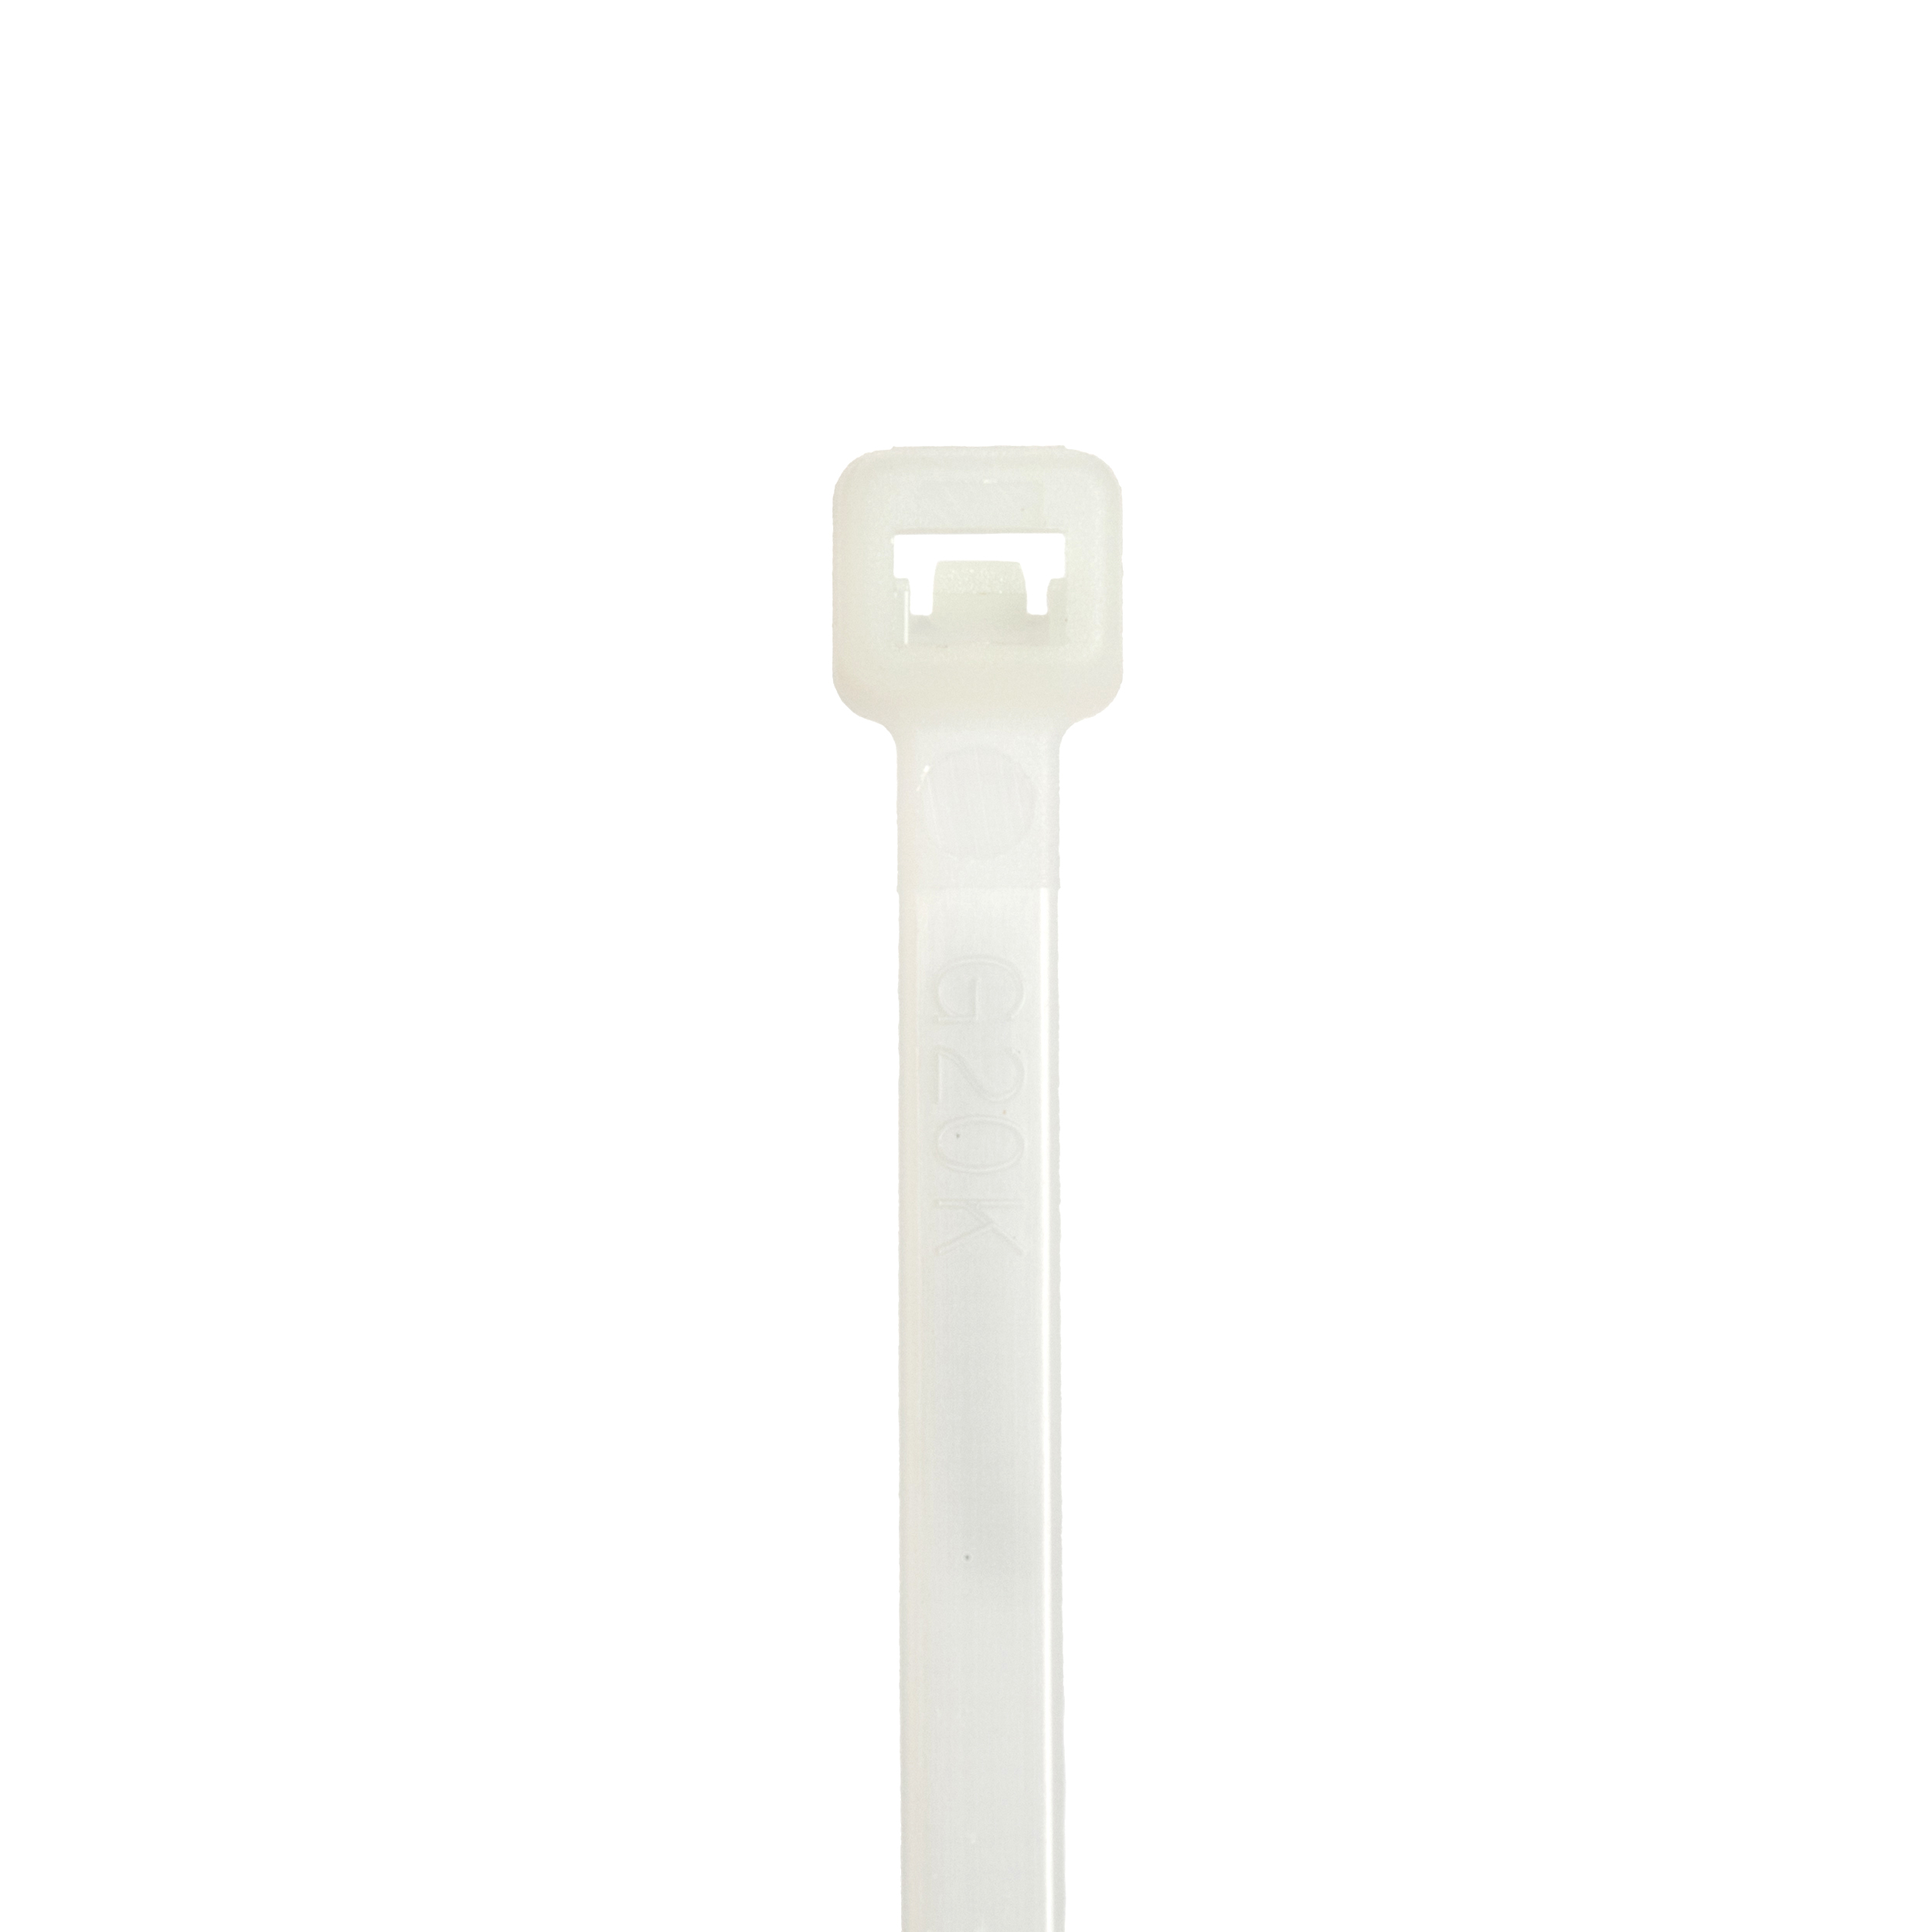 PAN S6-40-C 5.51" CABLE TIE 40TS NA RAL